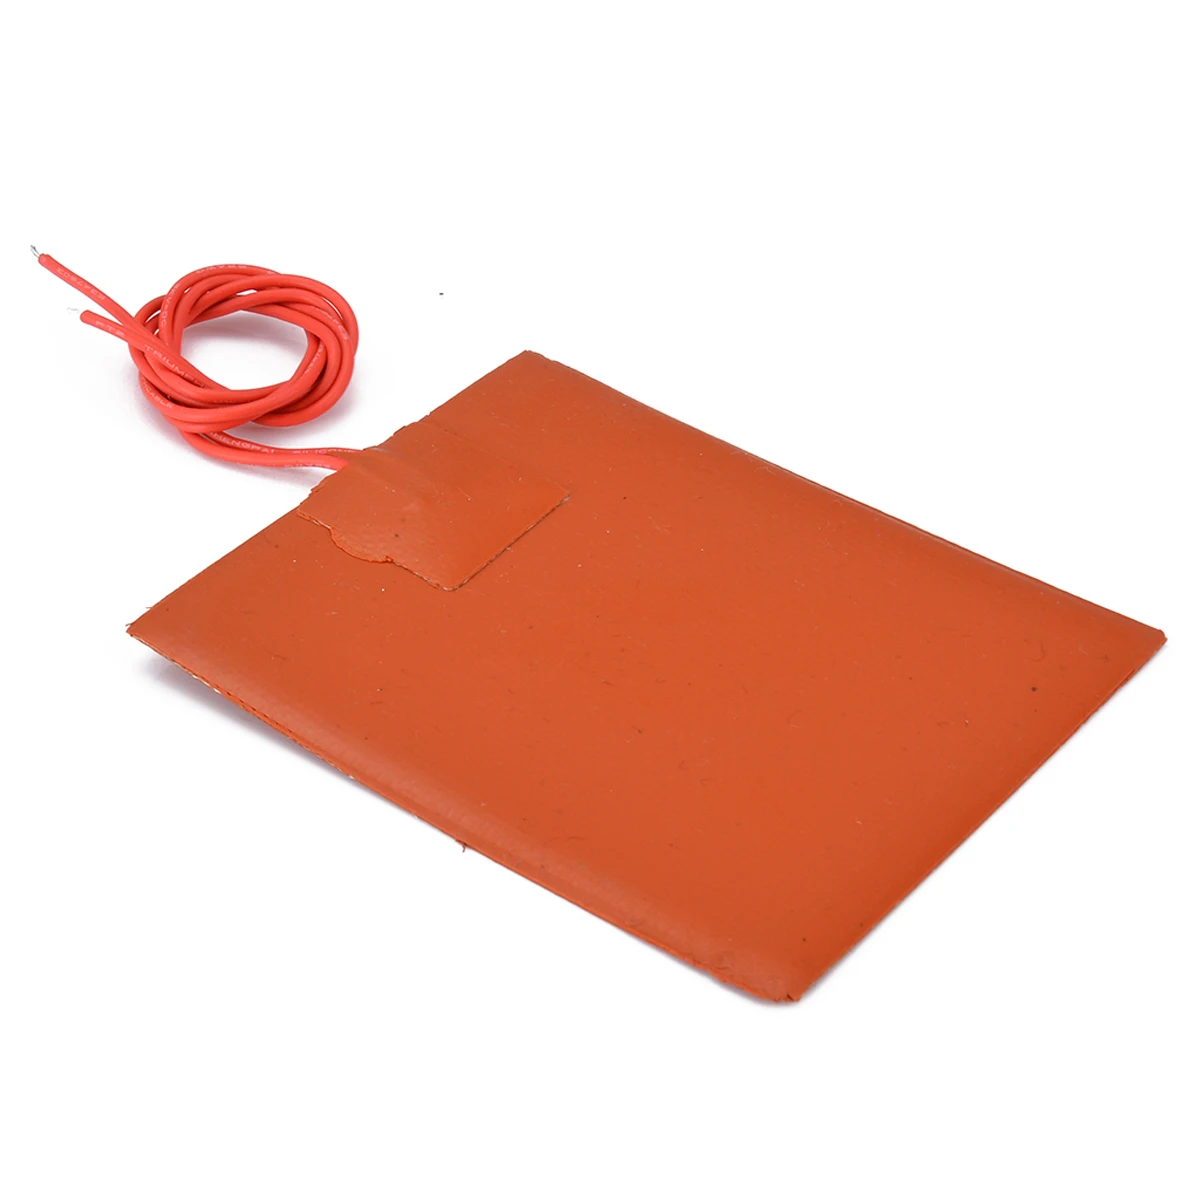 12V DC 20W Flexible Waterproof Silicon Heater Pad Household 3D Printer Electric Heating Pads 80x100mm